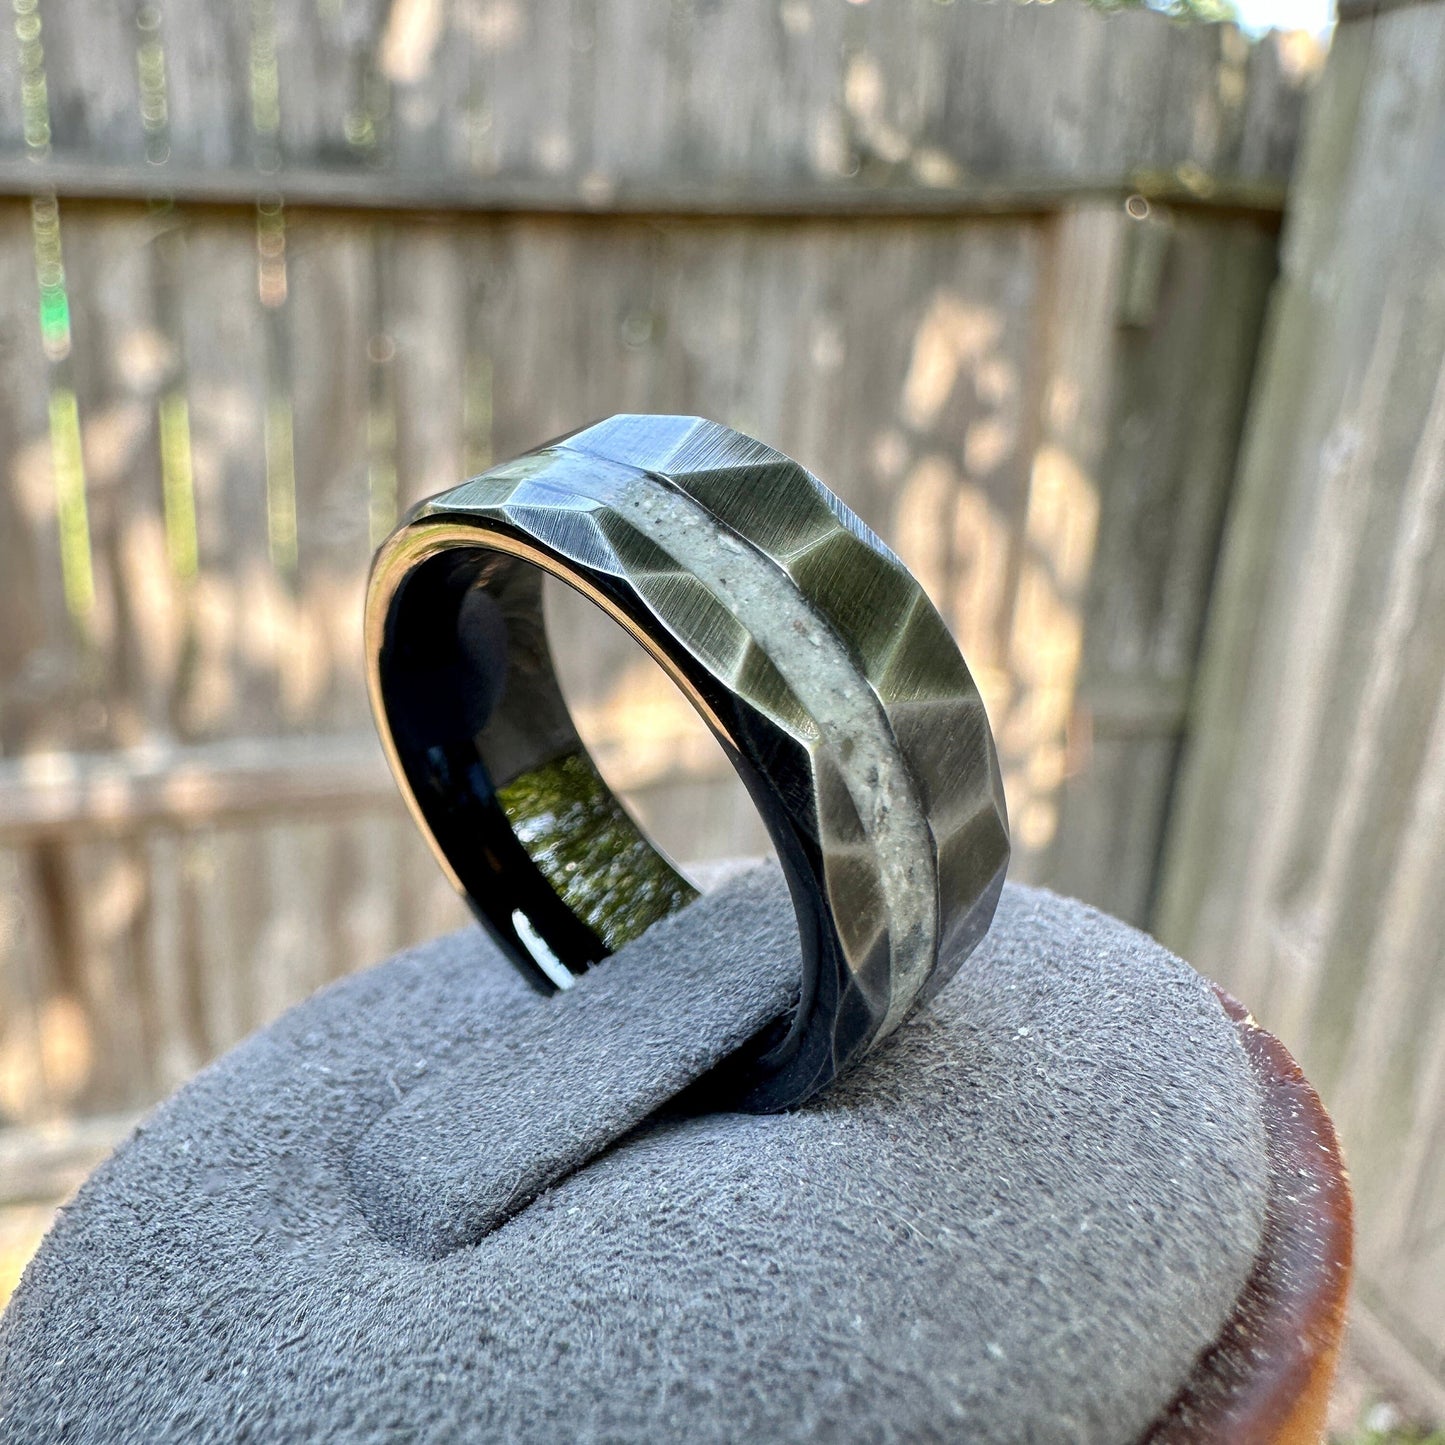 8mm Distressed Faceted Black Tungsten Cremation Ring